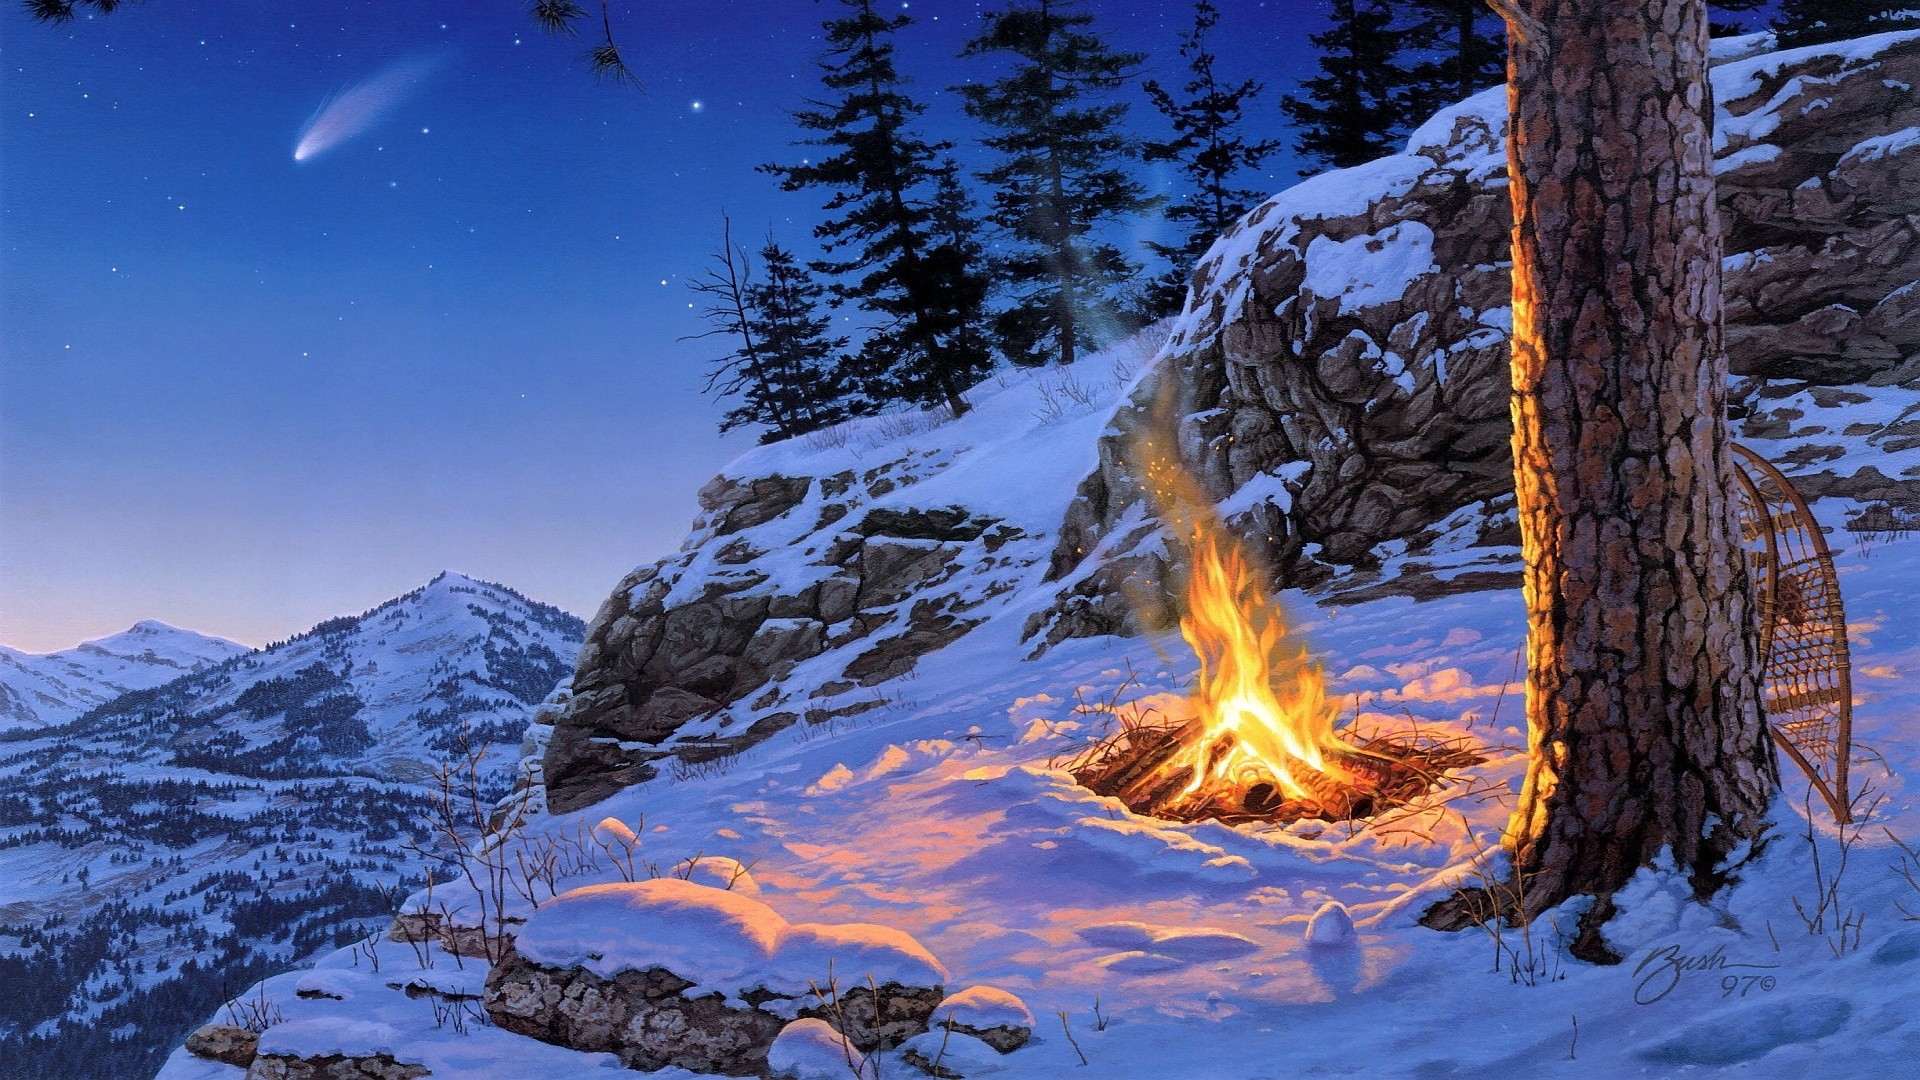 Fire on the snowy mountain wallpaper